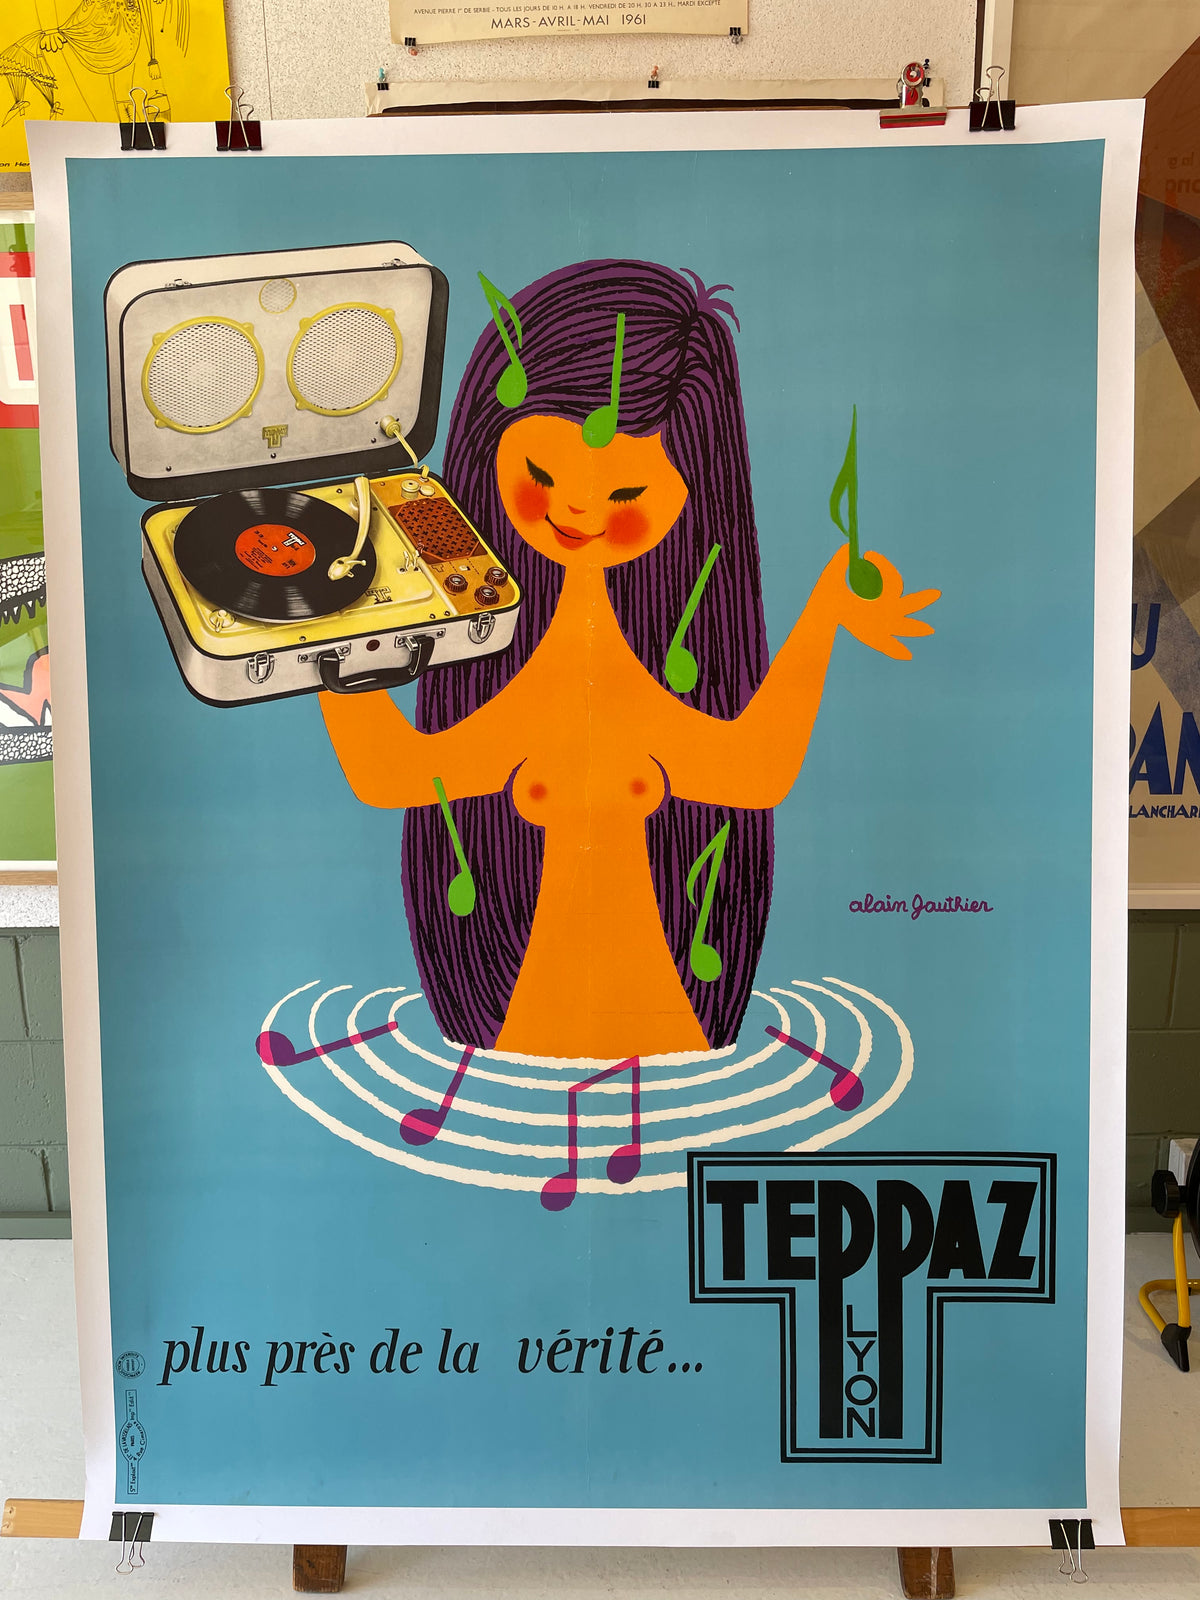 Teppaz Blue Record Girl by Gauthier